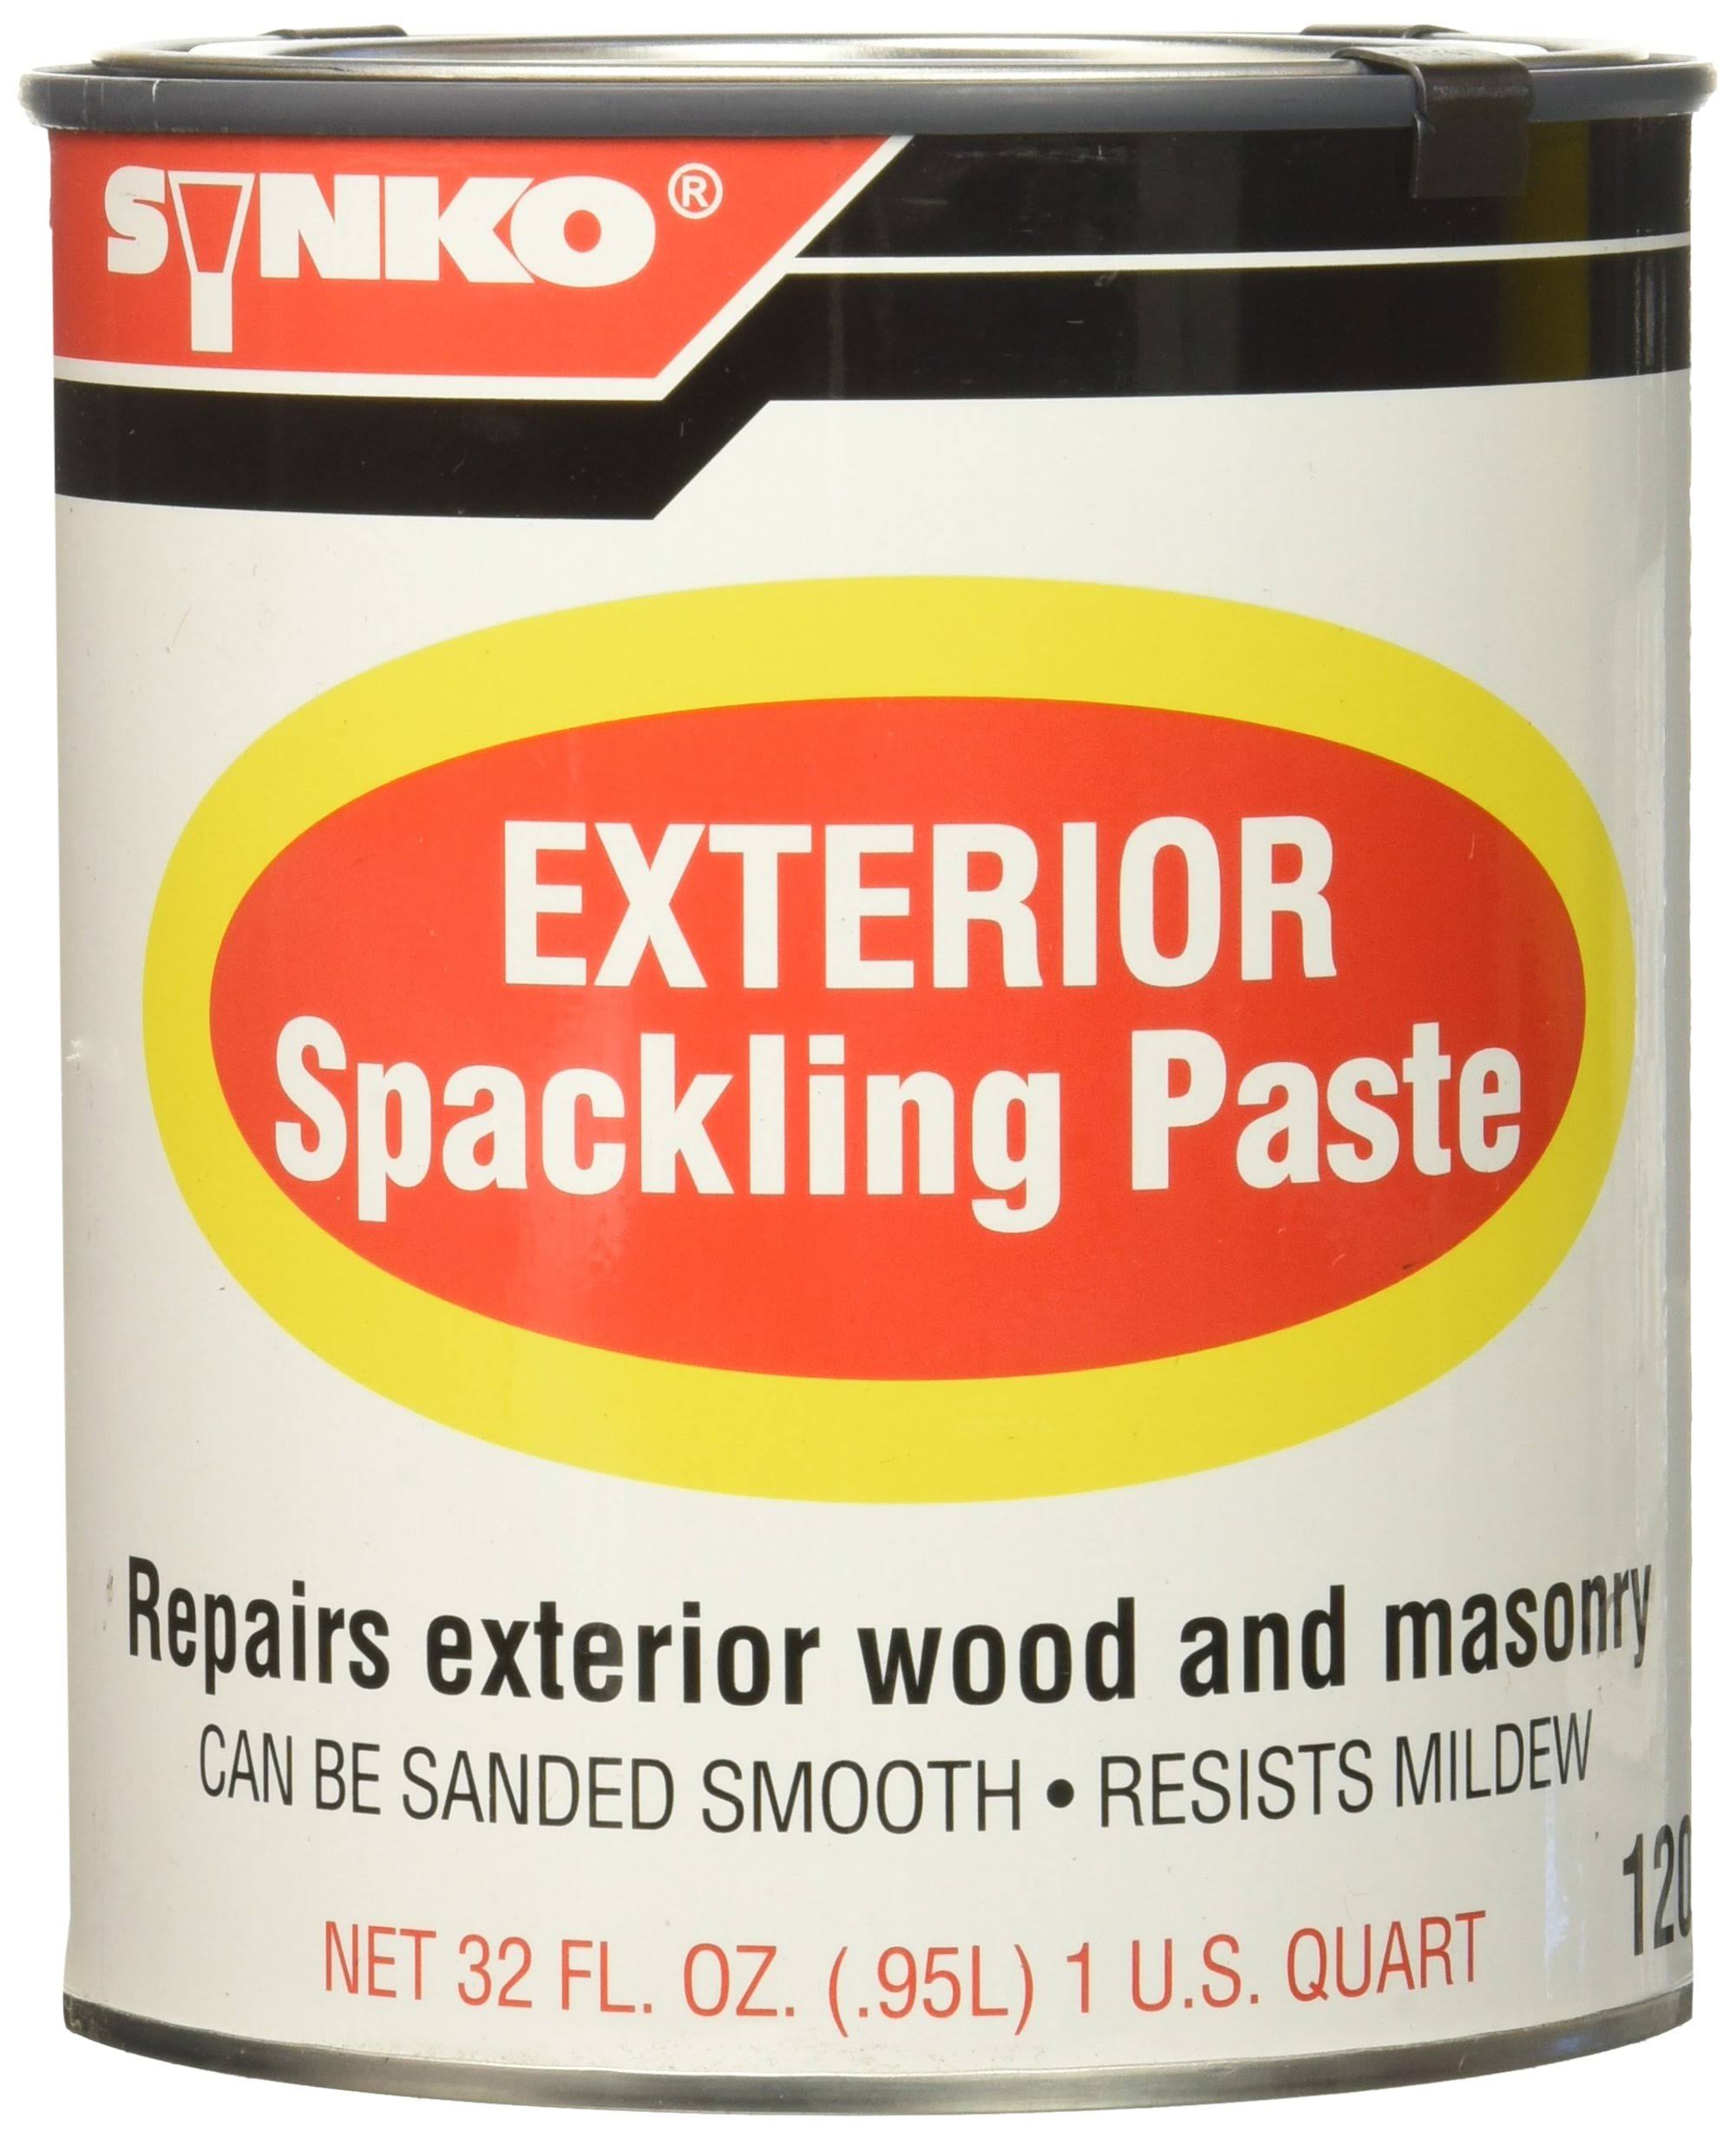 Synkoloid Exterior Spackling Paste Qt | Garage | Free Shipping On All Orders | Best Price Guarantee | 30 Day Money Back Guarantee